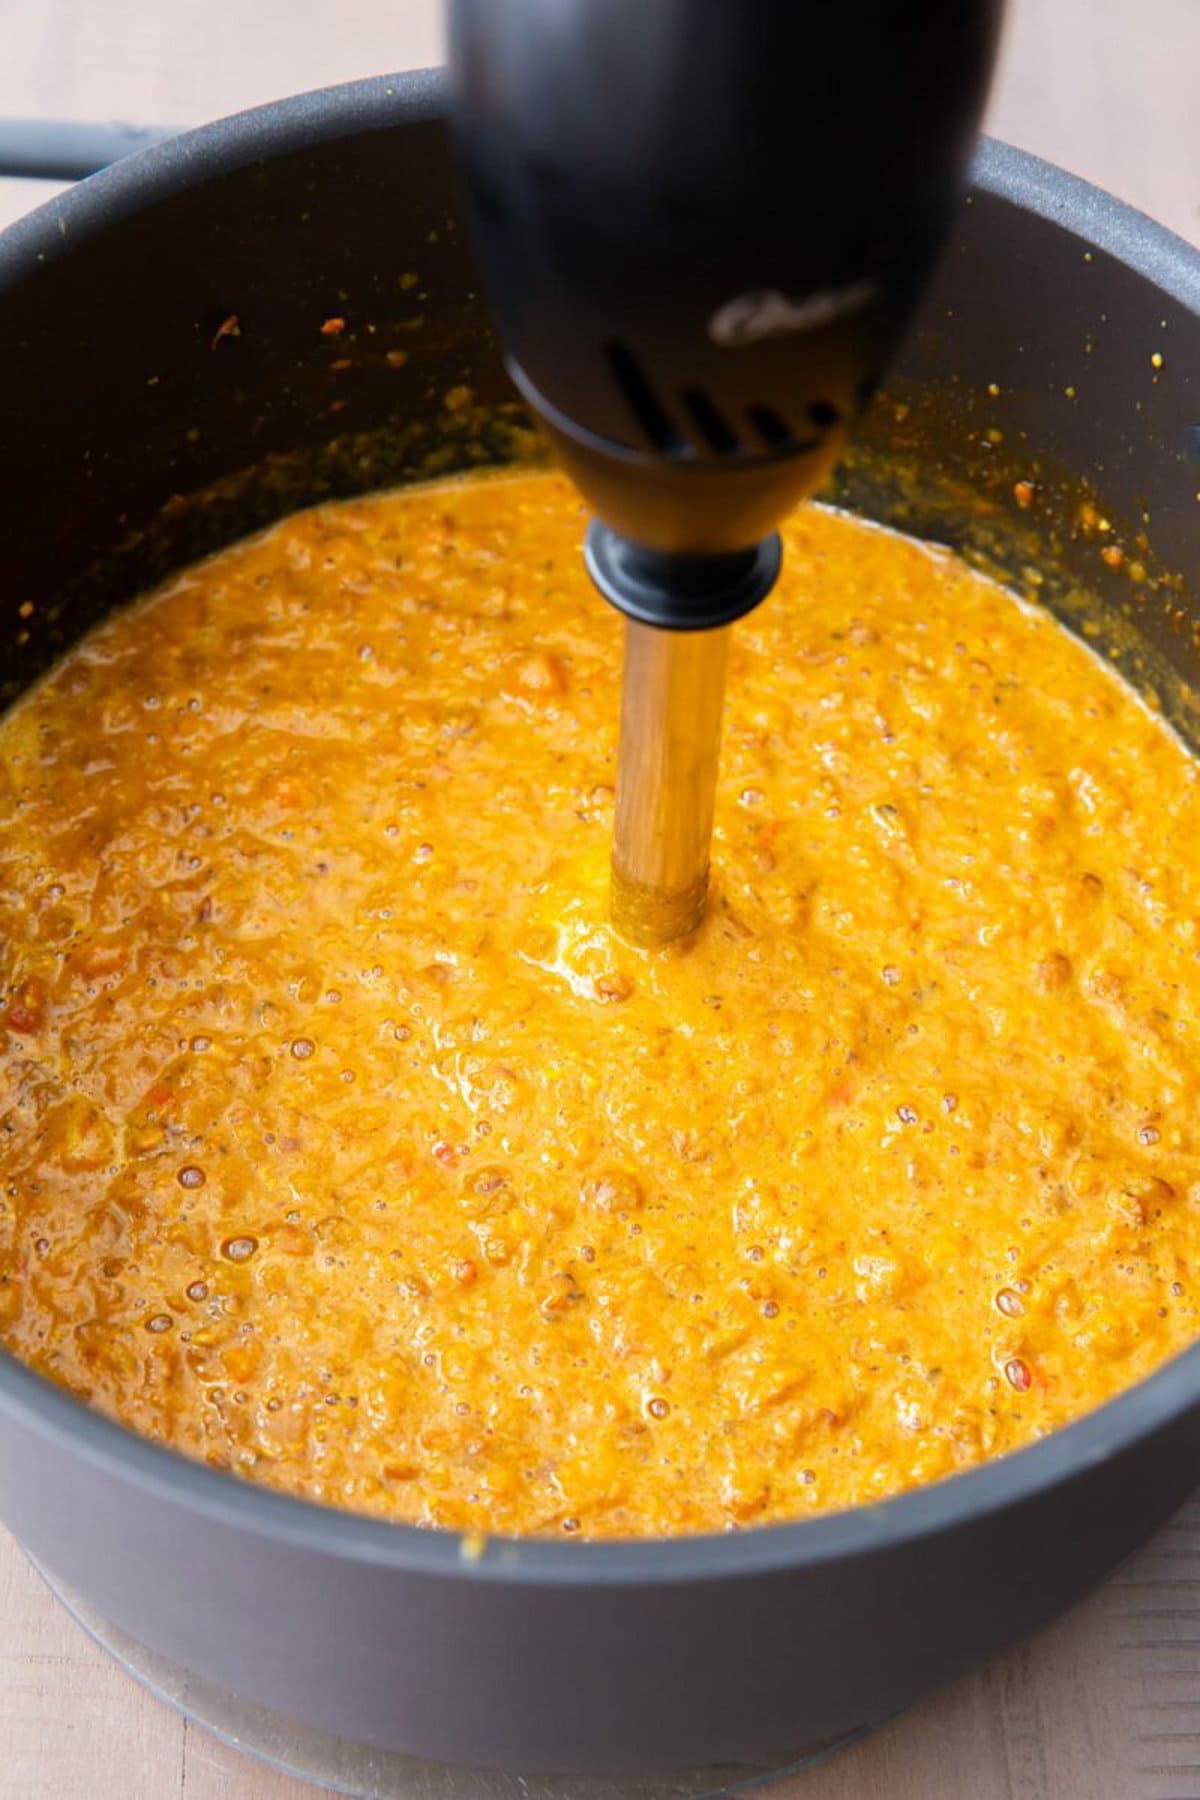 Immersion blender in the pot of  Mulligatawny Soup to puree it.